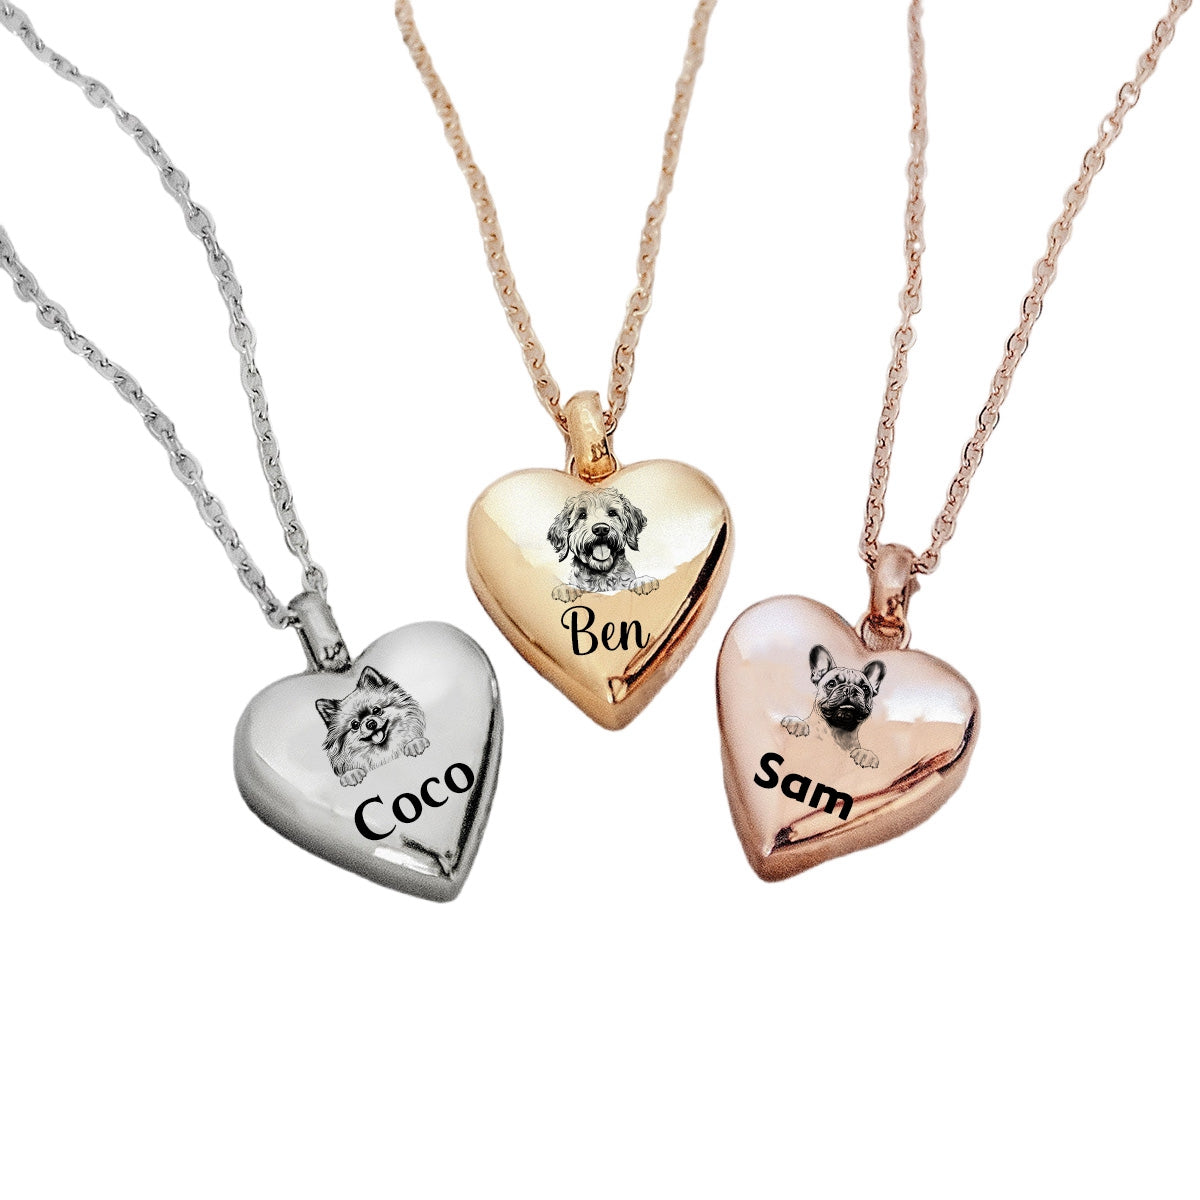 Personalized Tiny Heart Cremation Ash Urn Pendant Necklace Memorial Gift For Dog/Pet Lovers